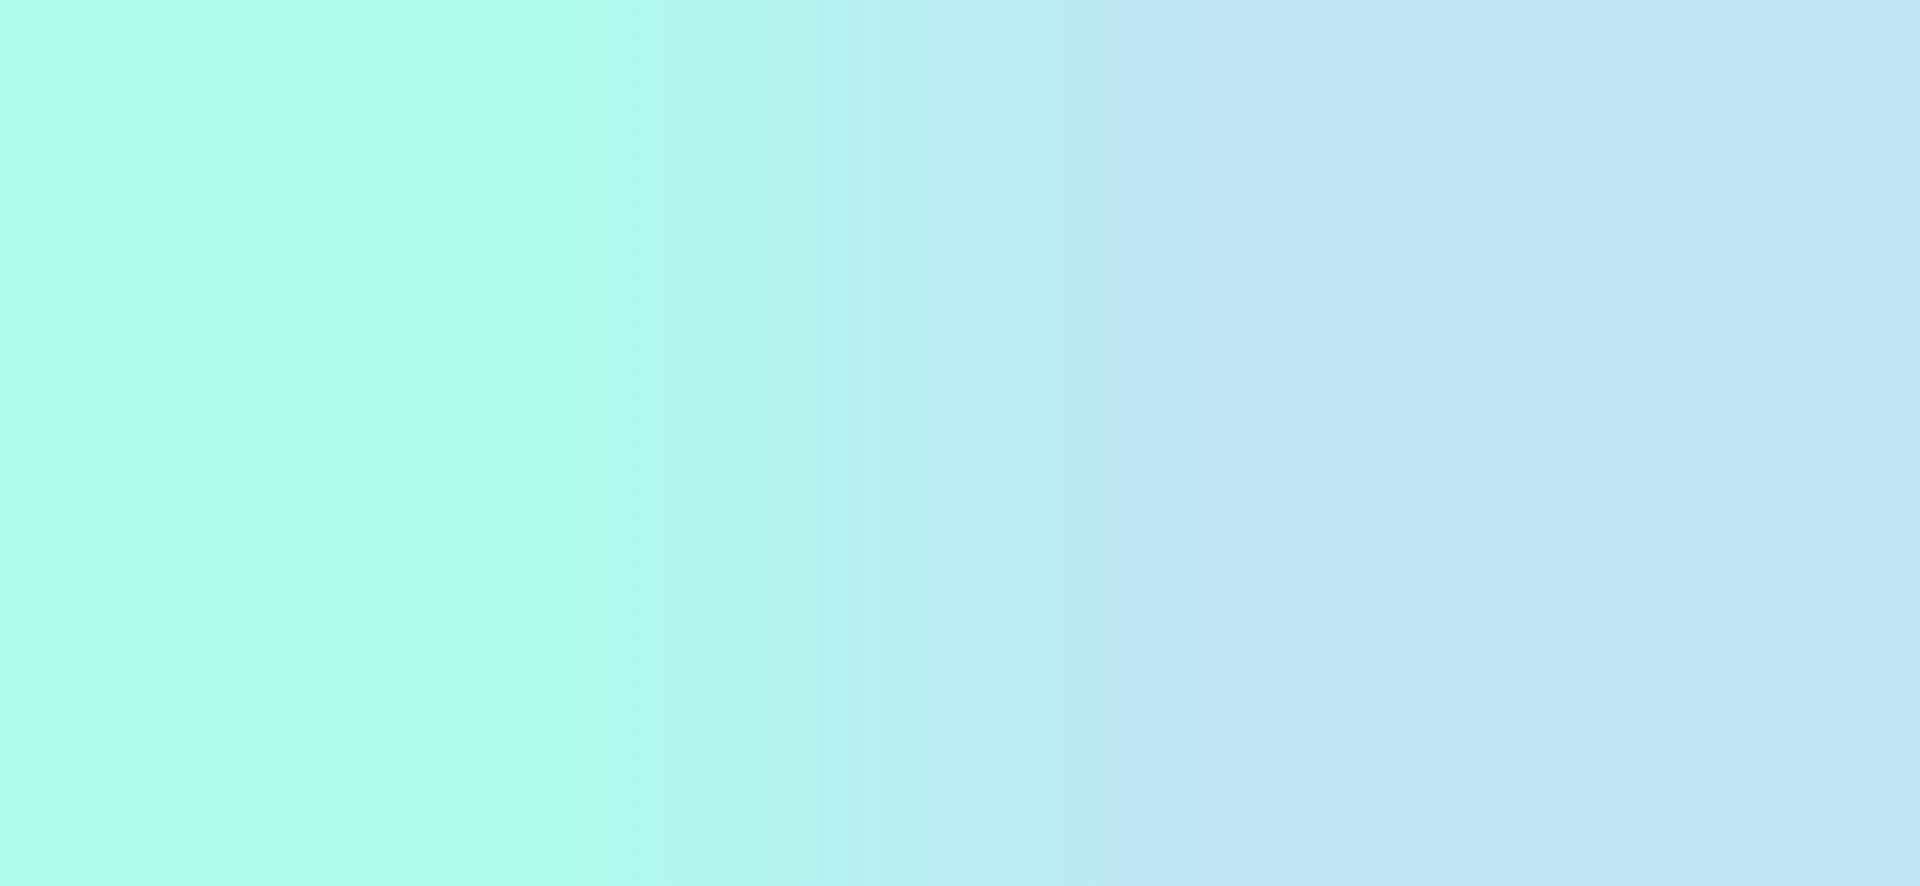 Green Gradient: +66 Background Gradient Colors with CSS